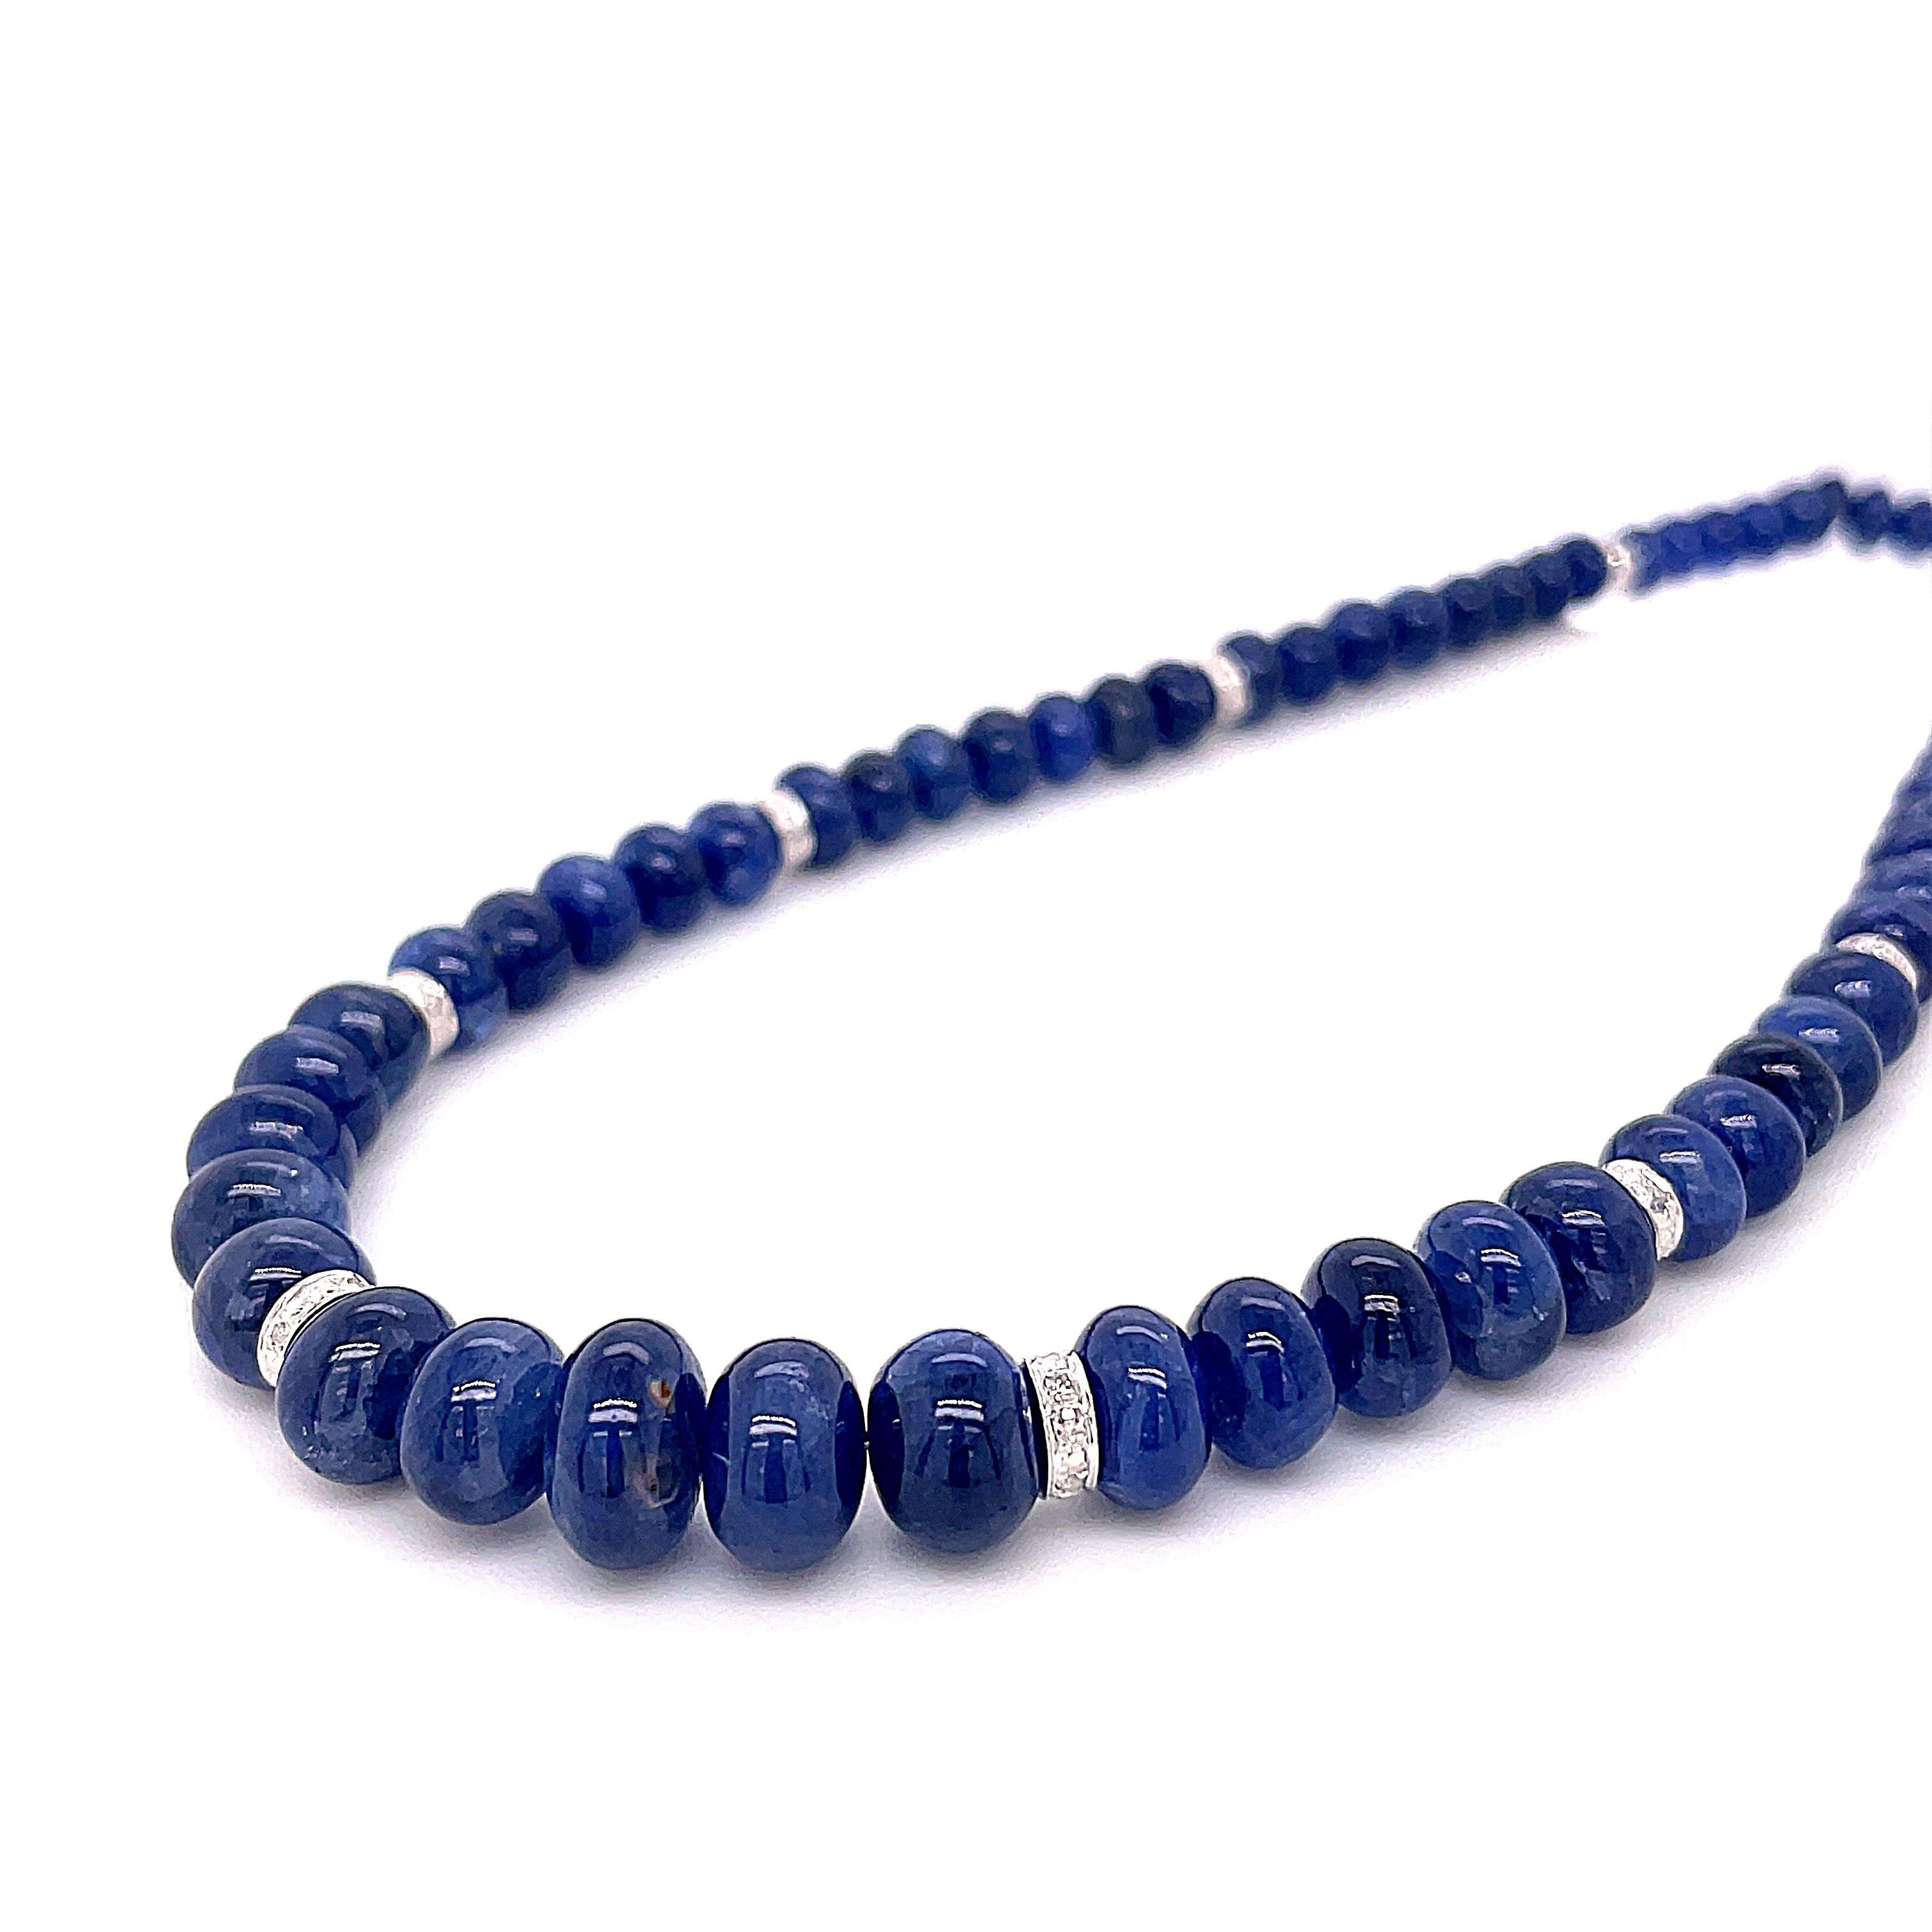 Featuring 188.06 carats of luxurious blue sapphire beads sourced from Burma and boasting a natural beauty enhanced by their no-heat treatment.

Accentuating the sapphire beads are ten diamond roundels, adding a touch of sparkle and glamour to the